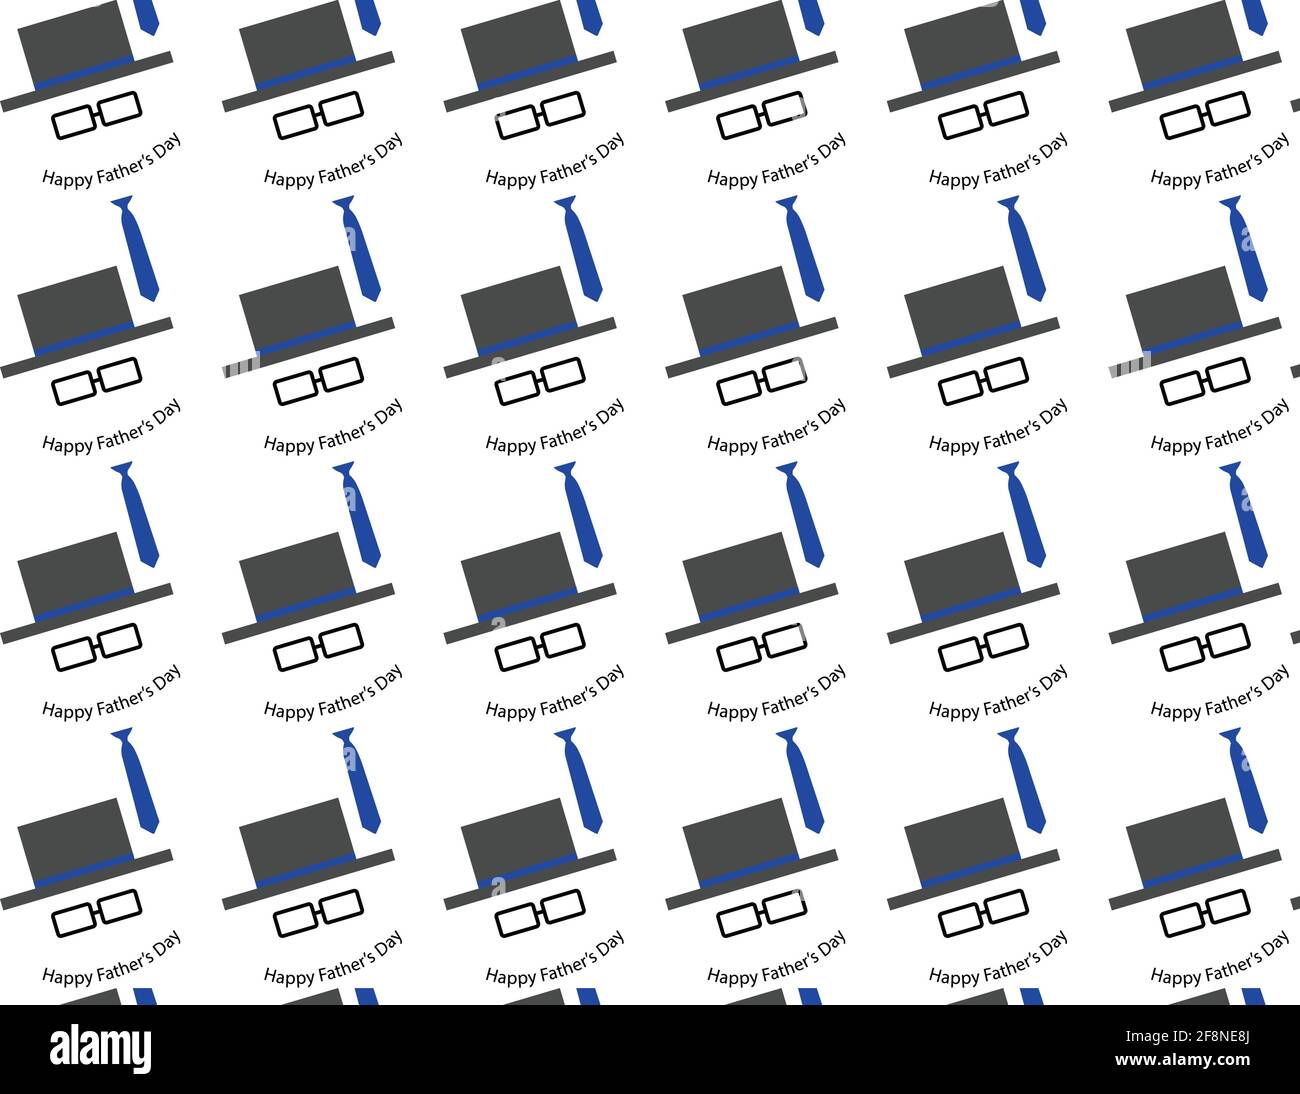 Funny Happy Father’s Day pattern design, with gentleman silhouette and blue tie. Illustration Stock Photo